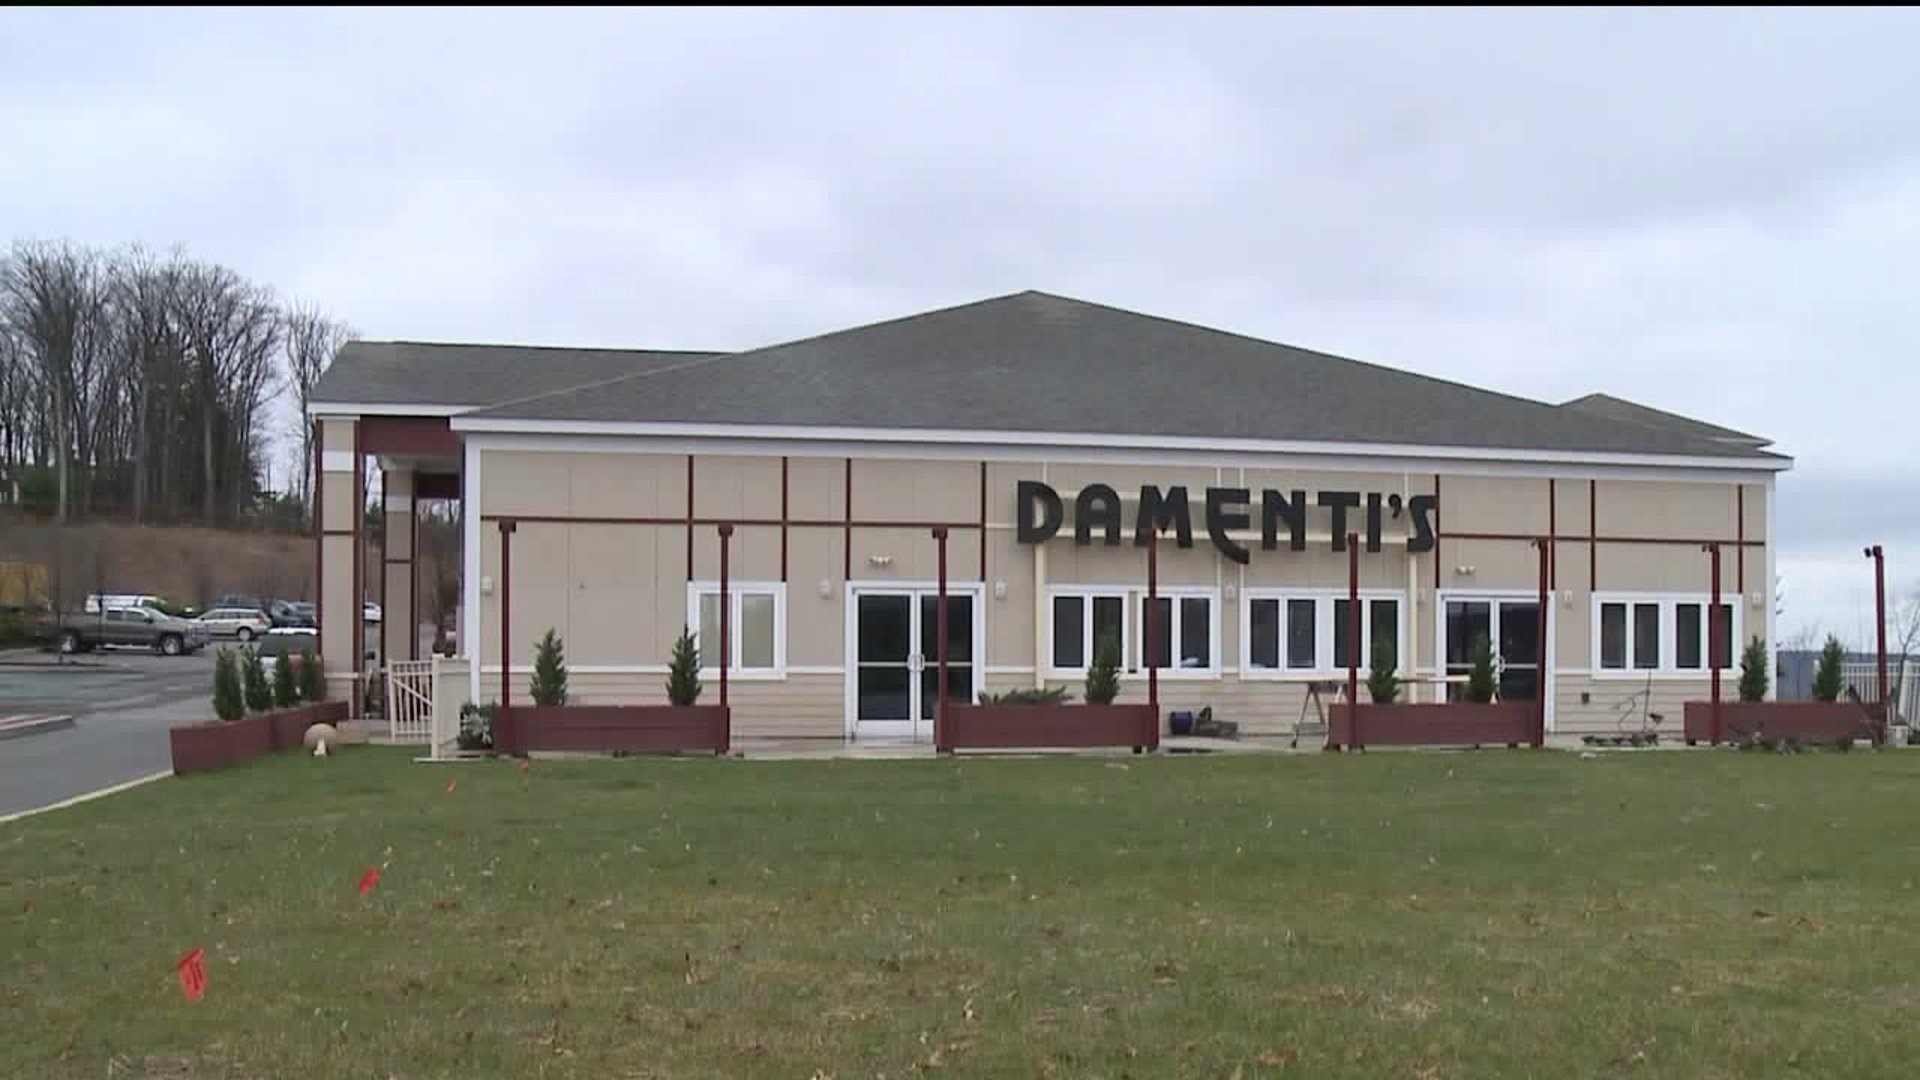 After Fire Four Years Ago, Damenti's to Reopen in New Place